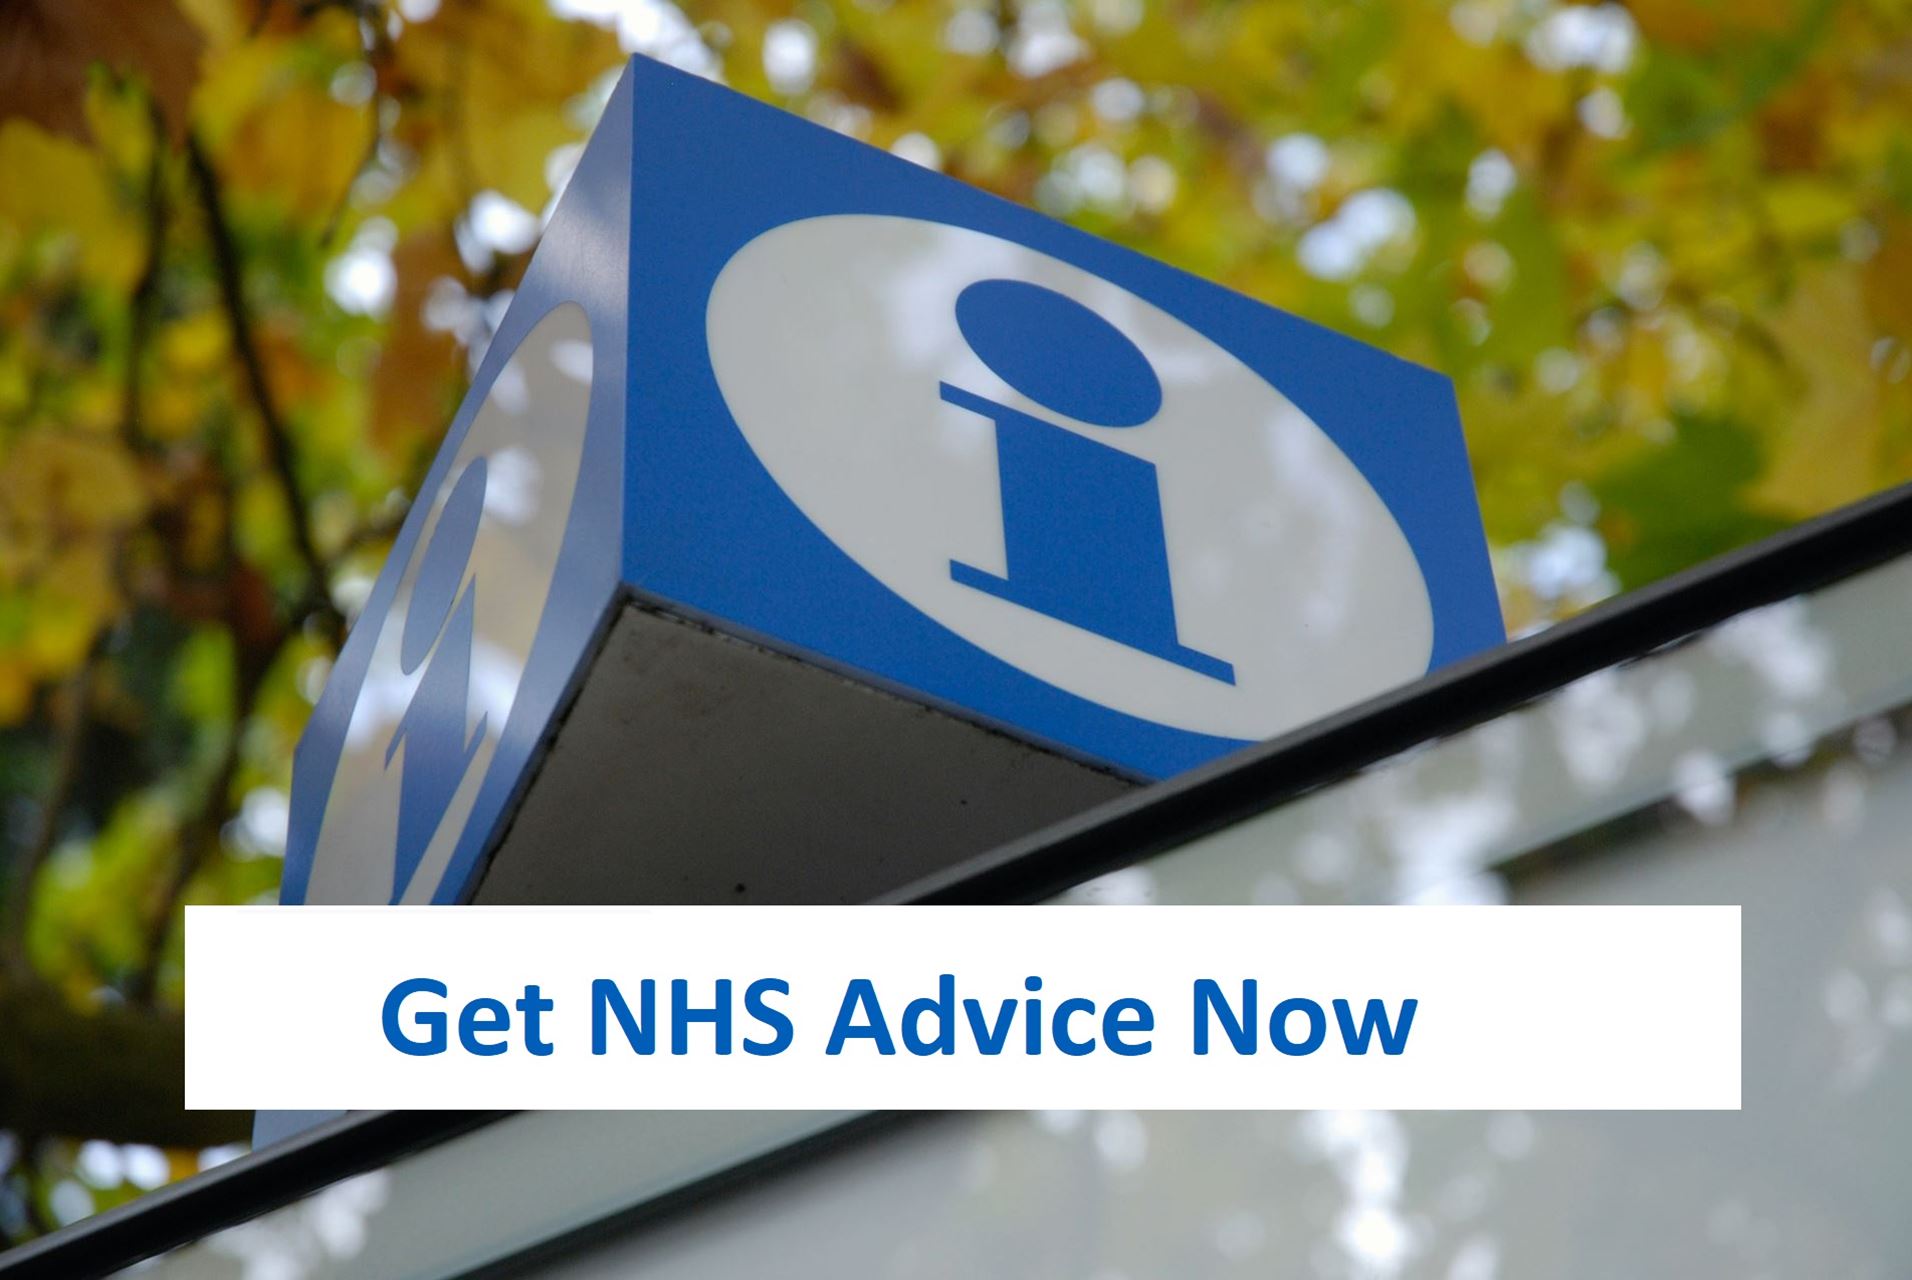 Get NHS Advice Now